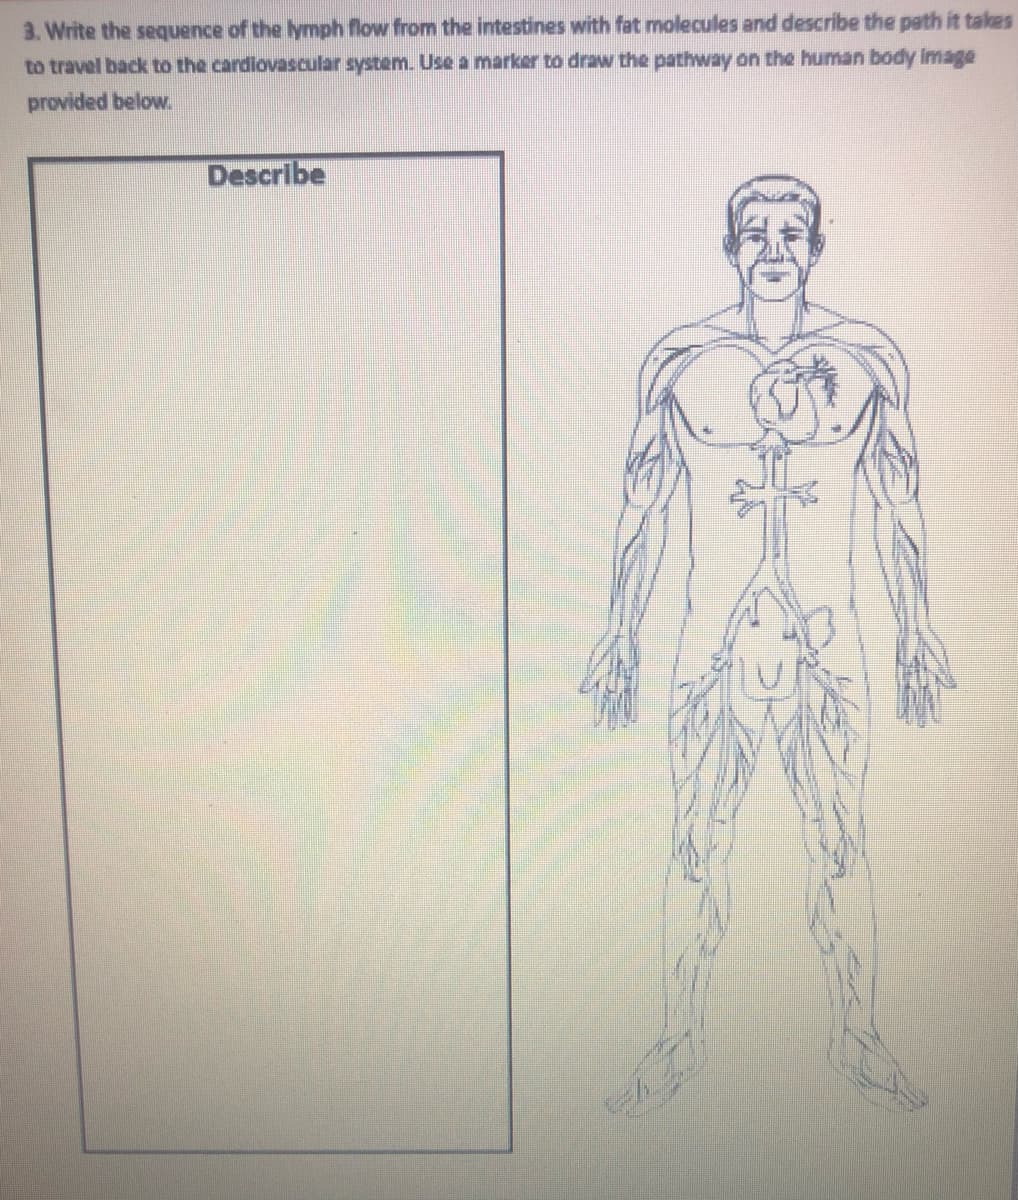 3. Write the sequence of the lymph flow from the intestines with fat molecules and describe the path it takes
to travel back to the cardiovascular system. Use a marker to draw the pathway on the human body image
provided below.
Describe
